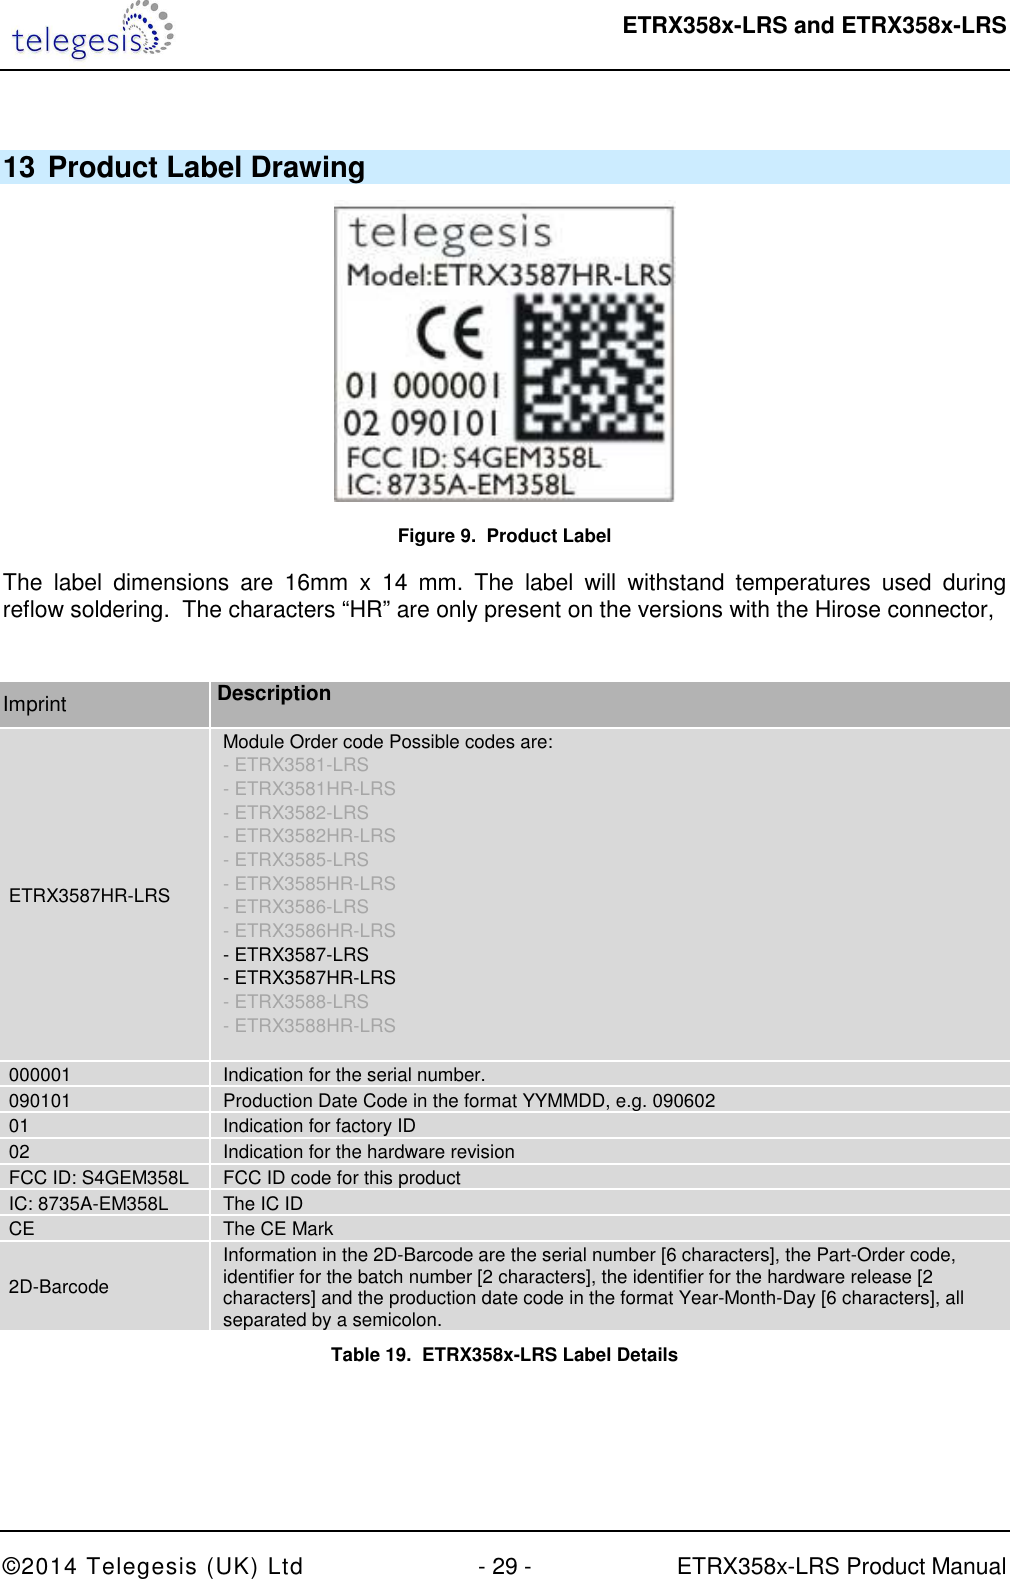  ETRX358x-LRS and ETRX358x-LRS  ©2014 Telegesis (UK) Ltd  - 29 -  ETRX358x-LRS Product Manual  13 Product Label Drawing  Figure 9.  Product Label The  label  dimensions  are  16mm  x  14  mm.  The  label  will  withstand  temperatures  used  during reflow soldering.  The characters “HR” are only present on the versions with the Hirose connector,  Imprint Description ETRX3587HR-LRS Module Order code Possible codes are:  - ETRX3581-LRS - ETRX3581HR-LRS - ETRX3582-LRS - ETRX3582HR-LRS - ETRX3585-LRS - ETRX3585HR-LRS - ETRX3586-LRS - ETRX3586HR-LRS - ETRX3587-LRS - ETRX3587HR-LRS - ETRX3588-LRS - ETRX3588HR-LRS  000001  Indication for the serial number. 090101  Production Date Code in the format YYMMDD, e.g. 090602 01  Indication for factory ID 02  Indication for the hardware revision FCC ID: S4GEM358L  FCC ID code for this product IC: 8735A-EM358L  The IC ID CE  The CE Mark 2D-Barcode Information in the 2D-Barcode are the serial number [6 characters], the Part-Order code, identifier for the batch number [2 characters], the identifier for the hardware release [2 characters] and the production date code in the format Year-Month-Day [6 characters], all separated by a semicolon. Table 19.  ETRX358x-LRS Label Details 